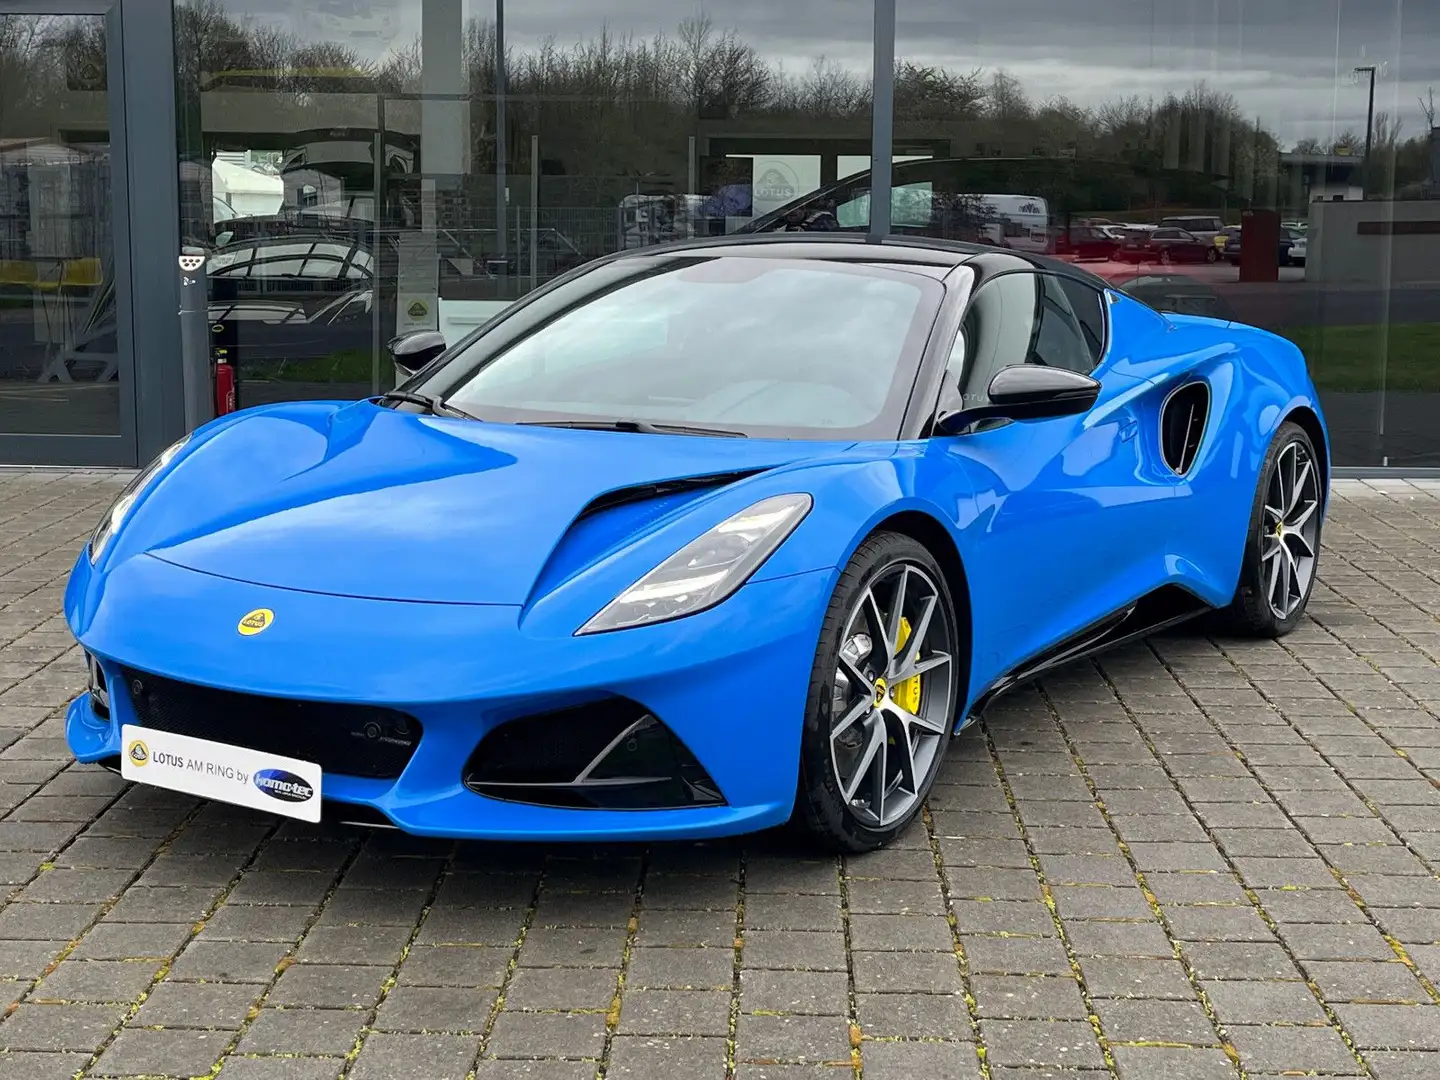 Lotus Emira I4 DCT "First Edition" by Lotus am Ring Blau - 1